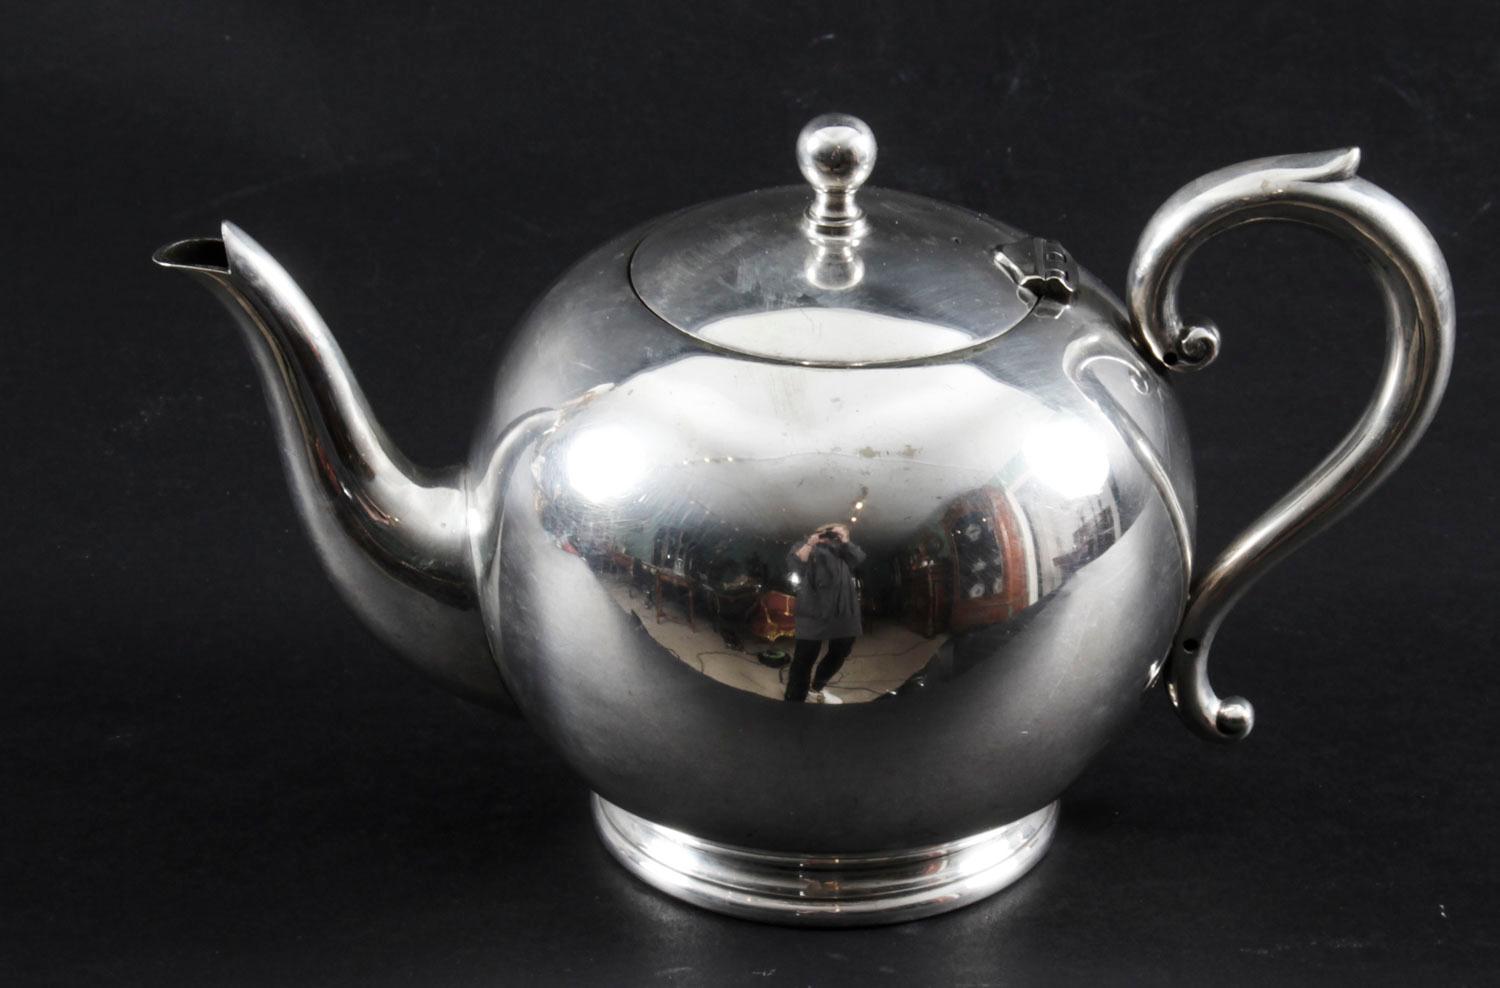 An exquisite antique English Art Deco silver plate teapot, with the makers mark of the renowned silversmith J B Chatterley & Sons Ltd, Birmingham, Circa 1930 in date.
Teapot has a plain circular rounded form onto a circular stepped foot. The